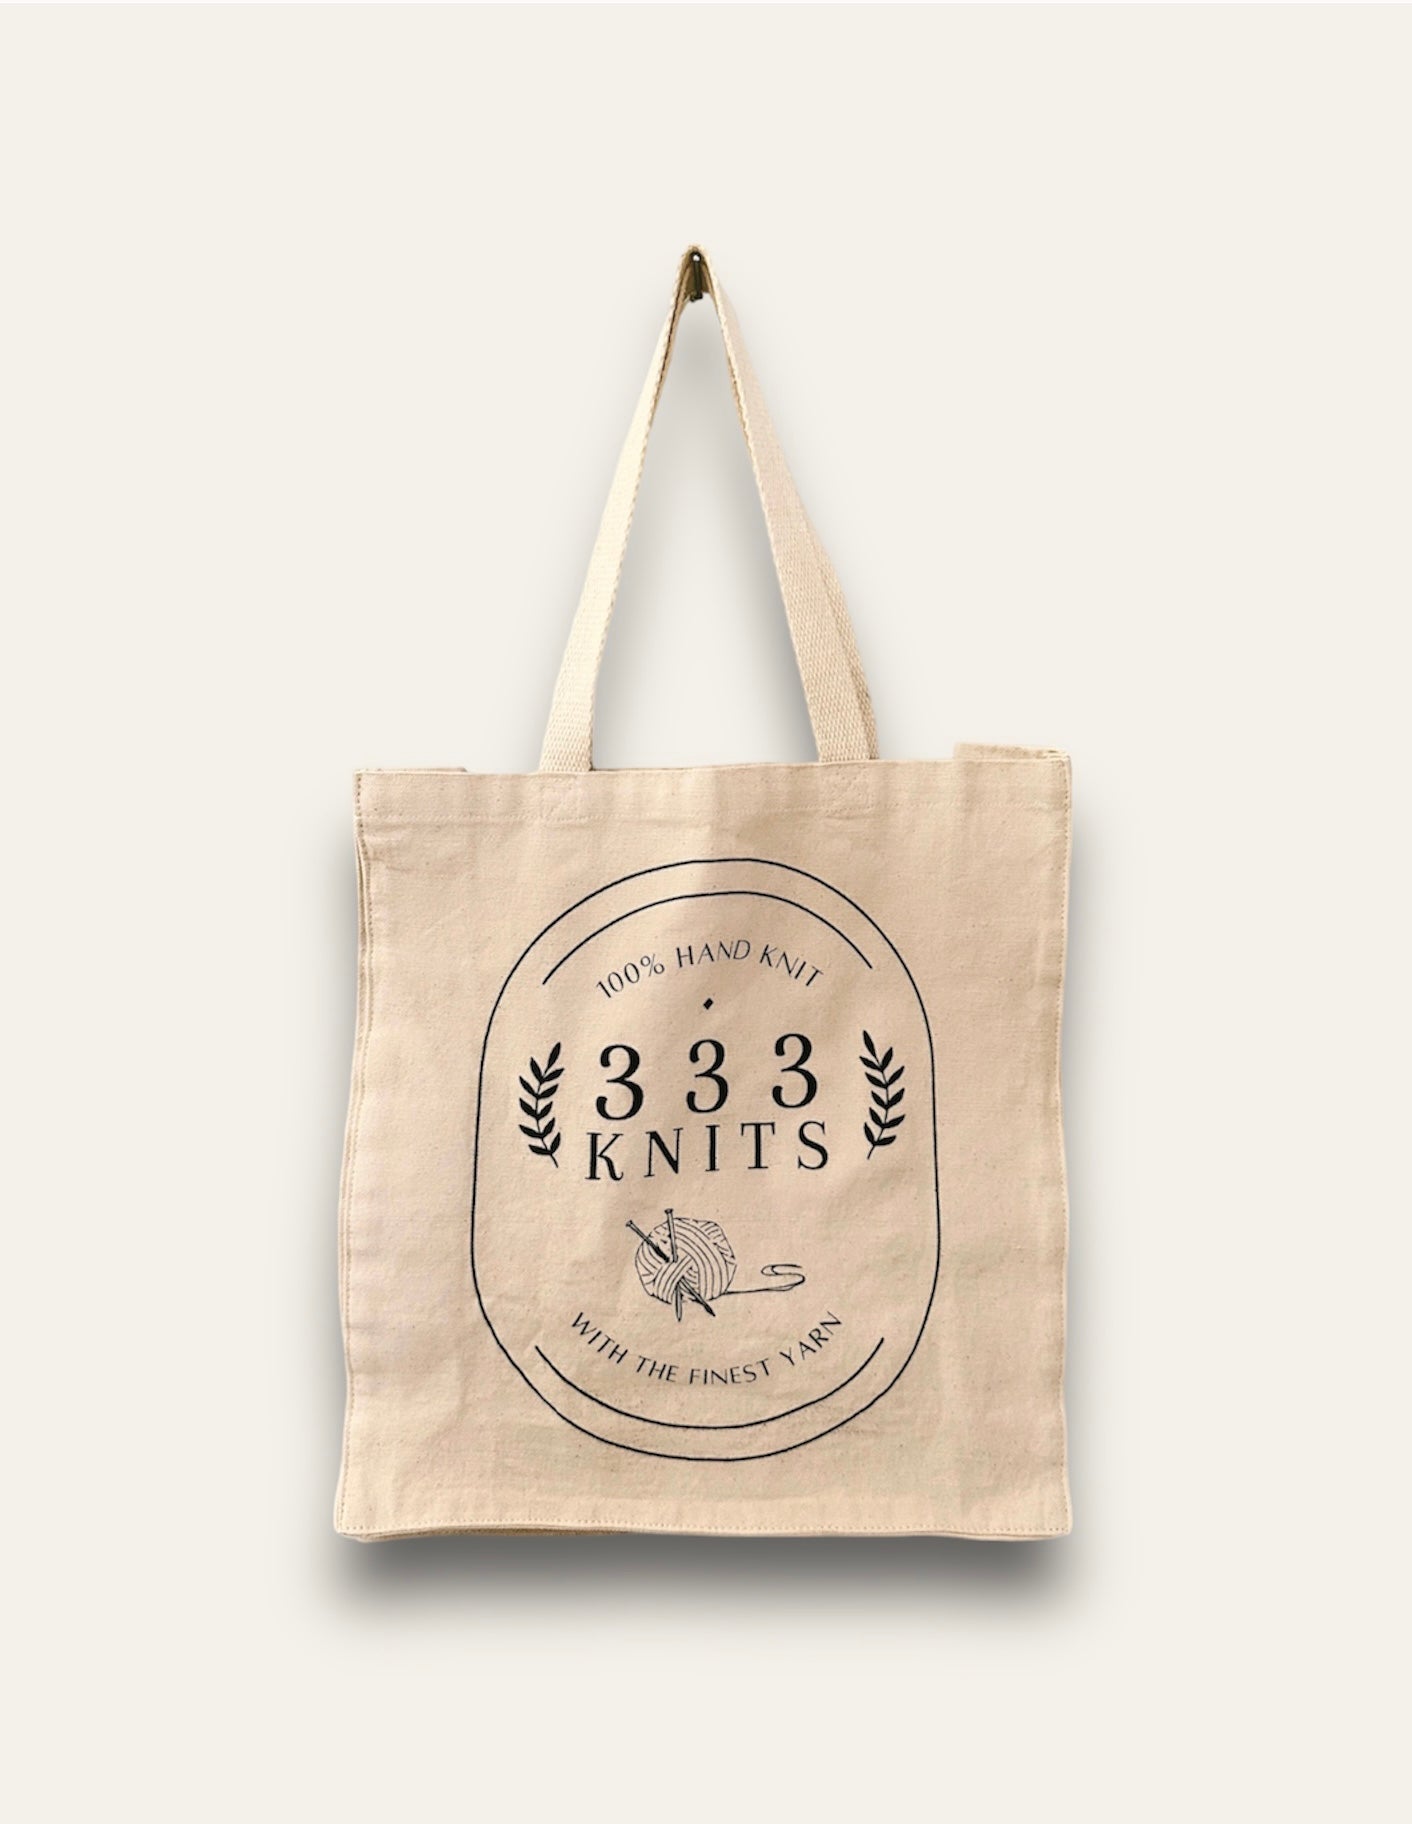 The Project Tote